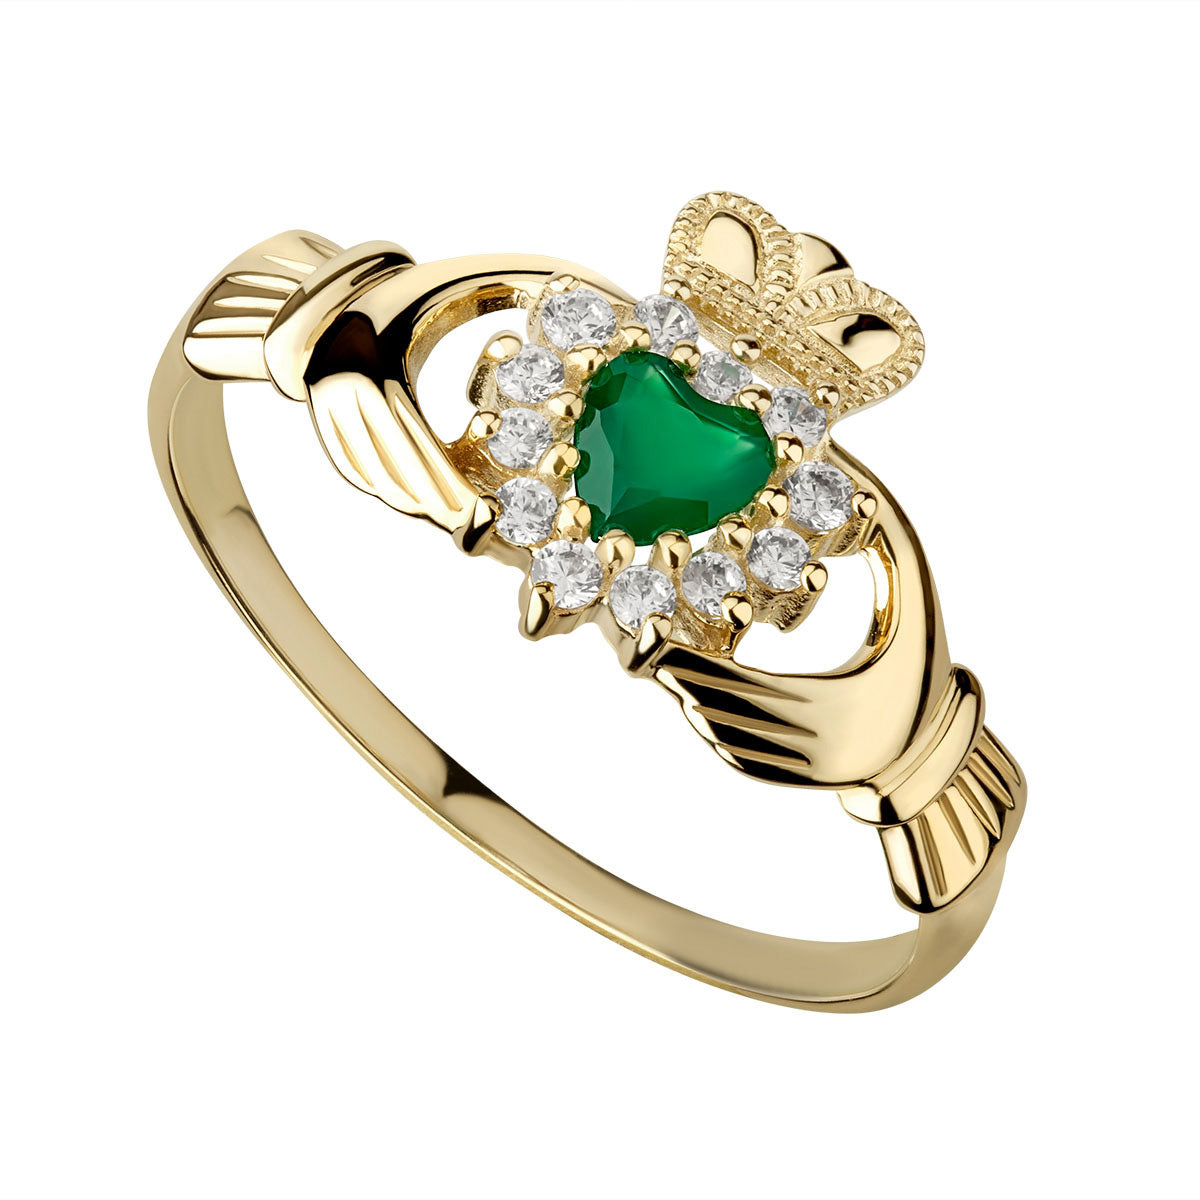 green agate Gold Claddagh ring from Solvar